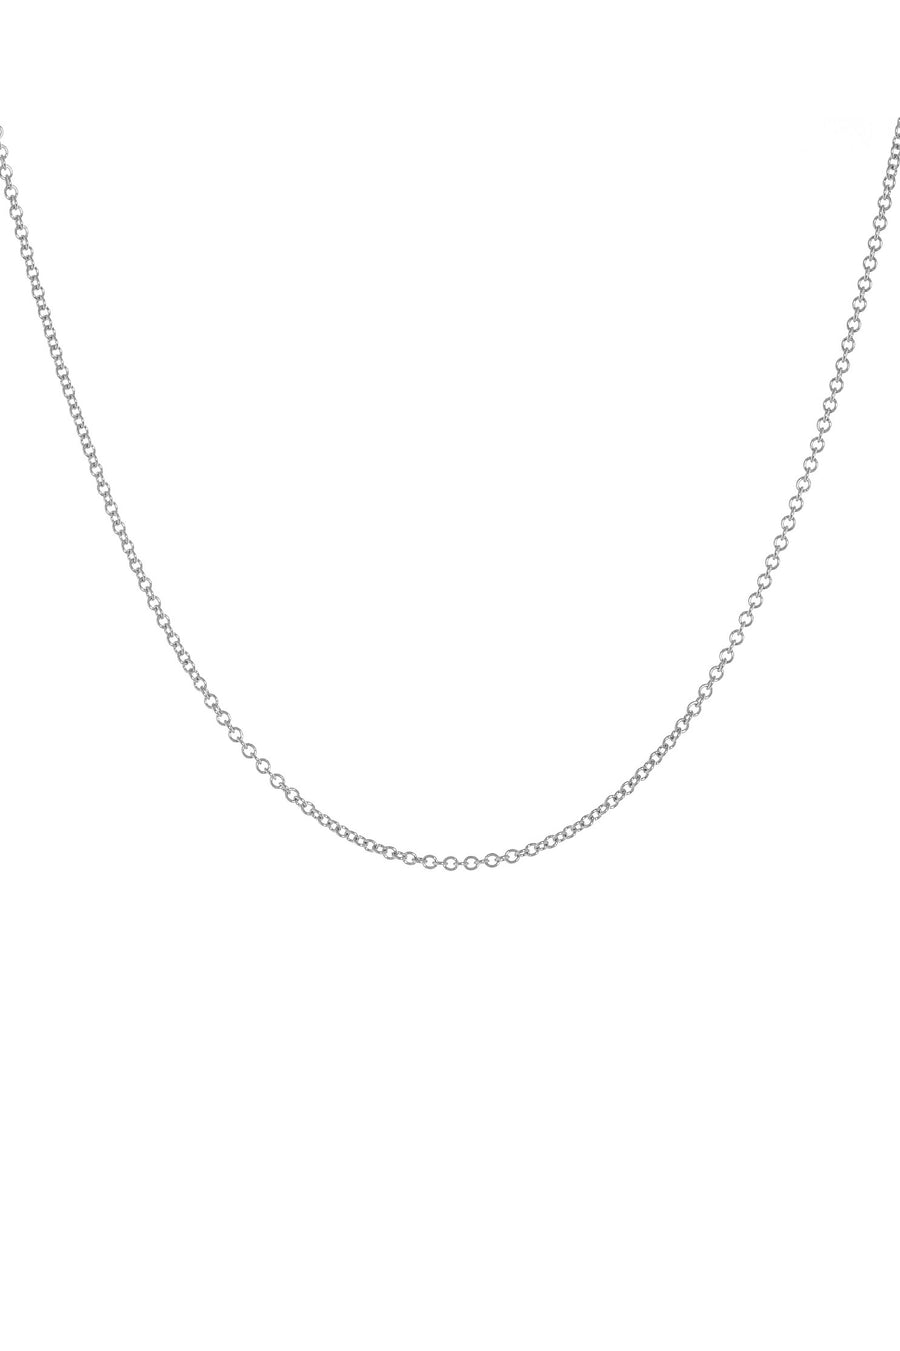 2.0mm Cable Chain in 14k Gold  | 24"